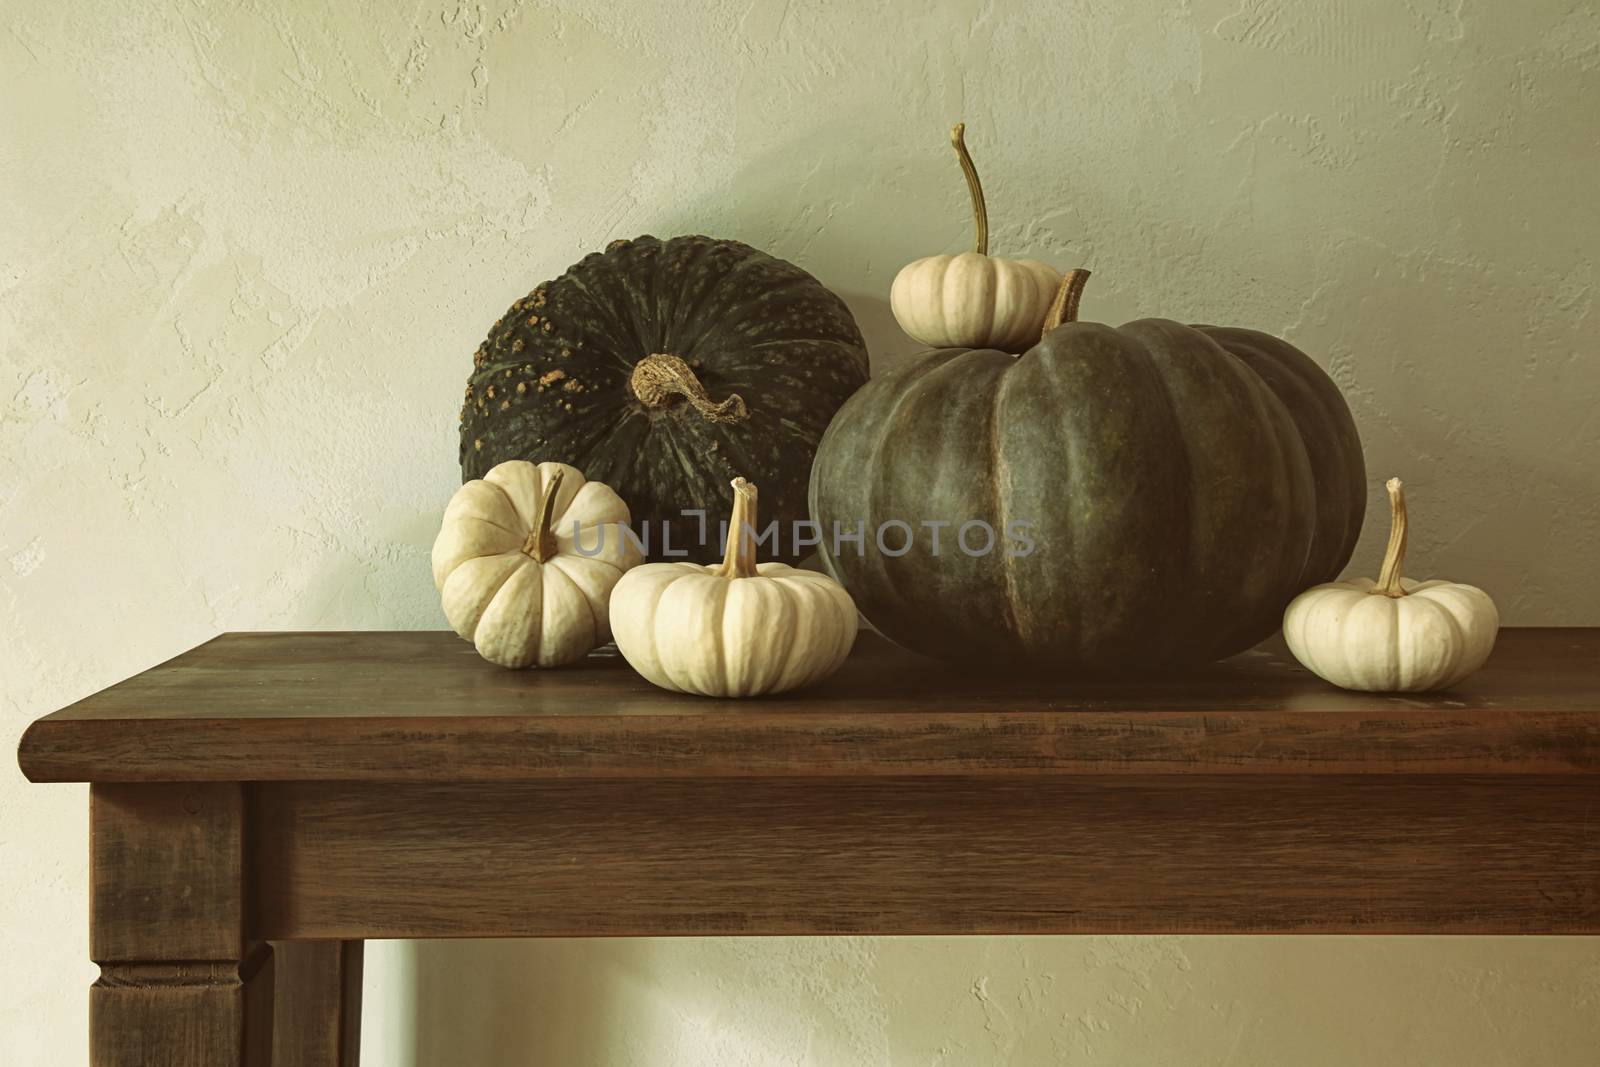 Green pumpkins and small gourds on table  by Sandralise